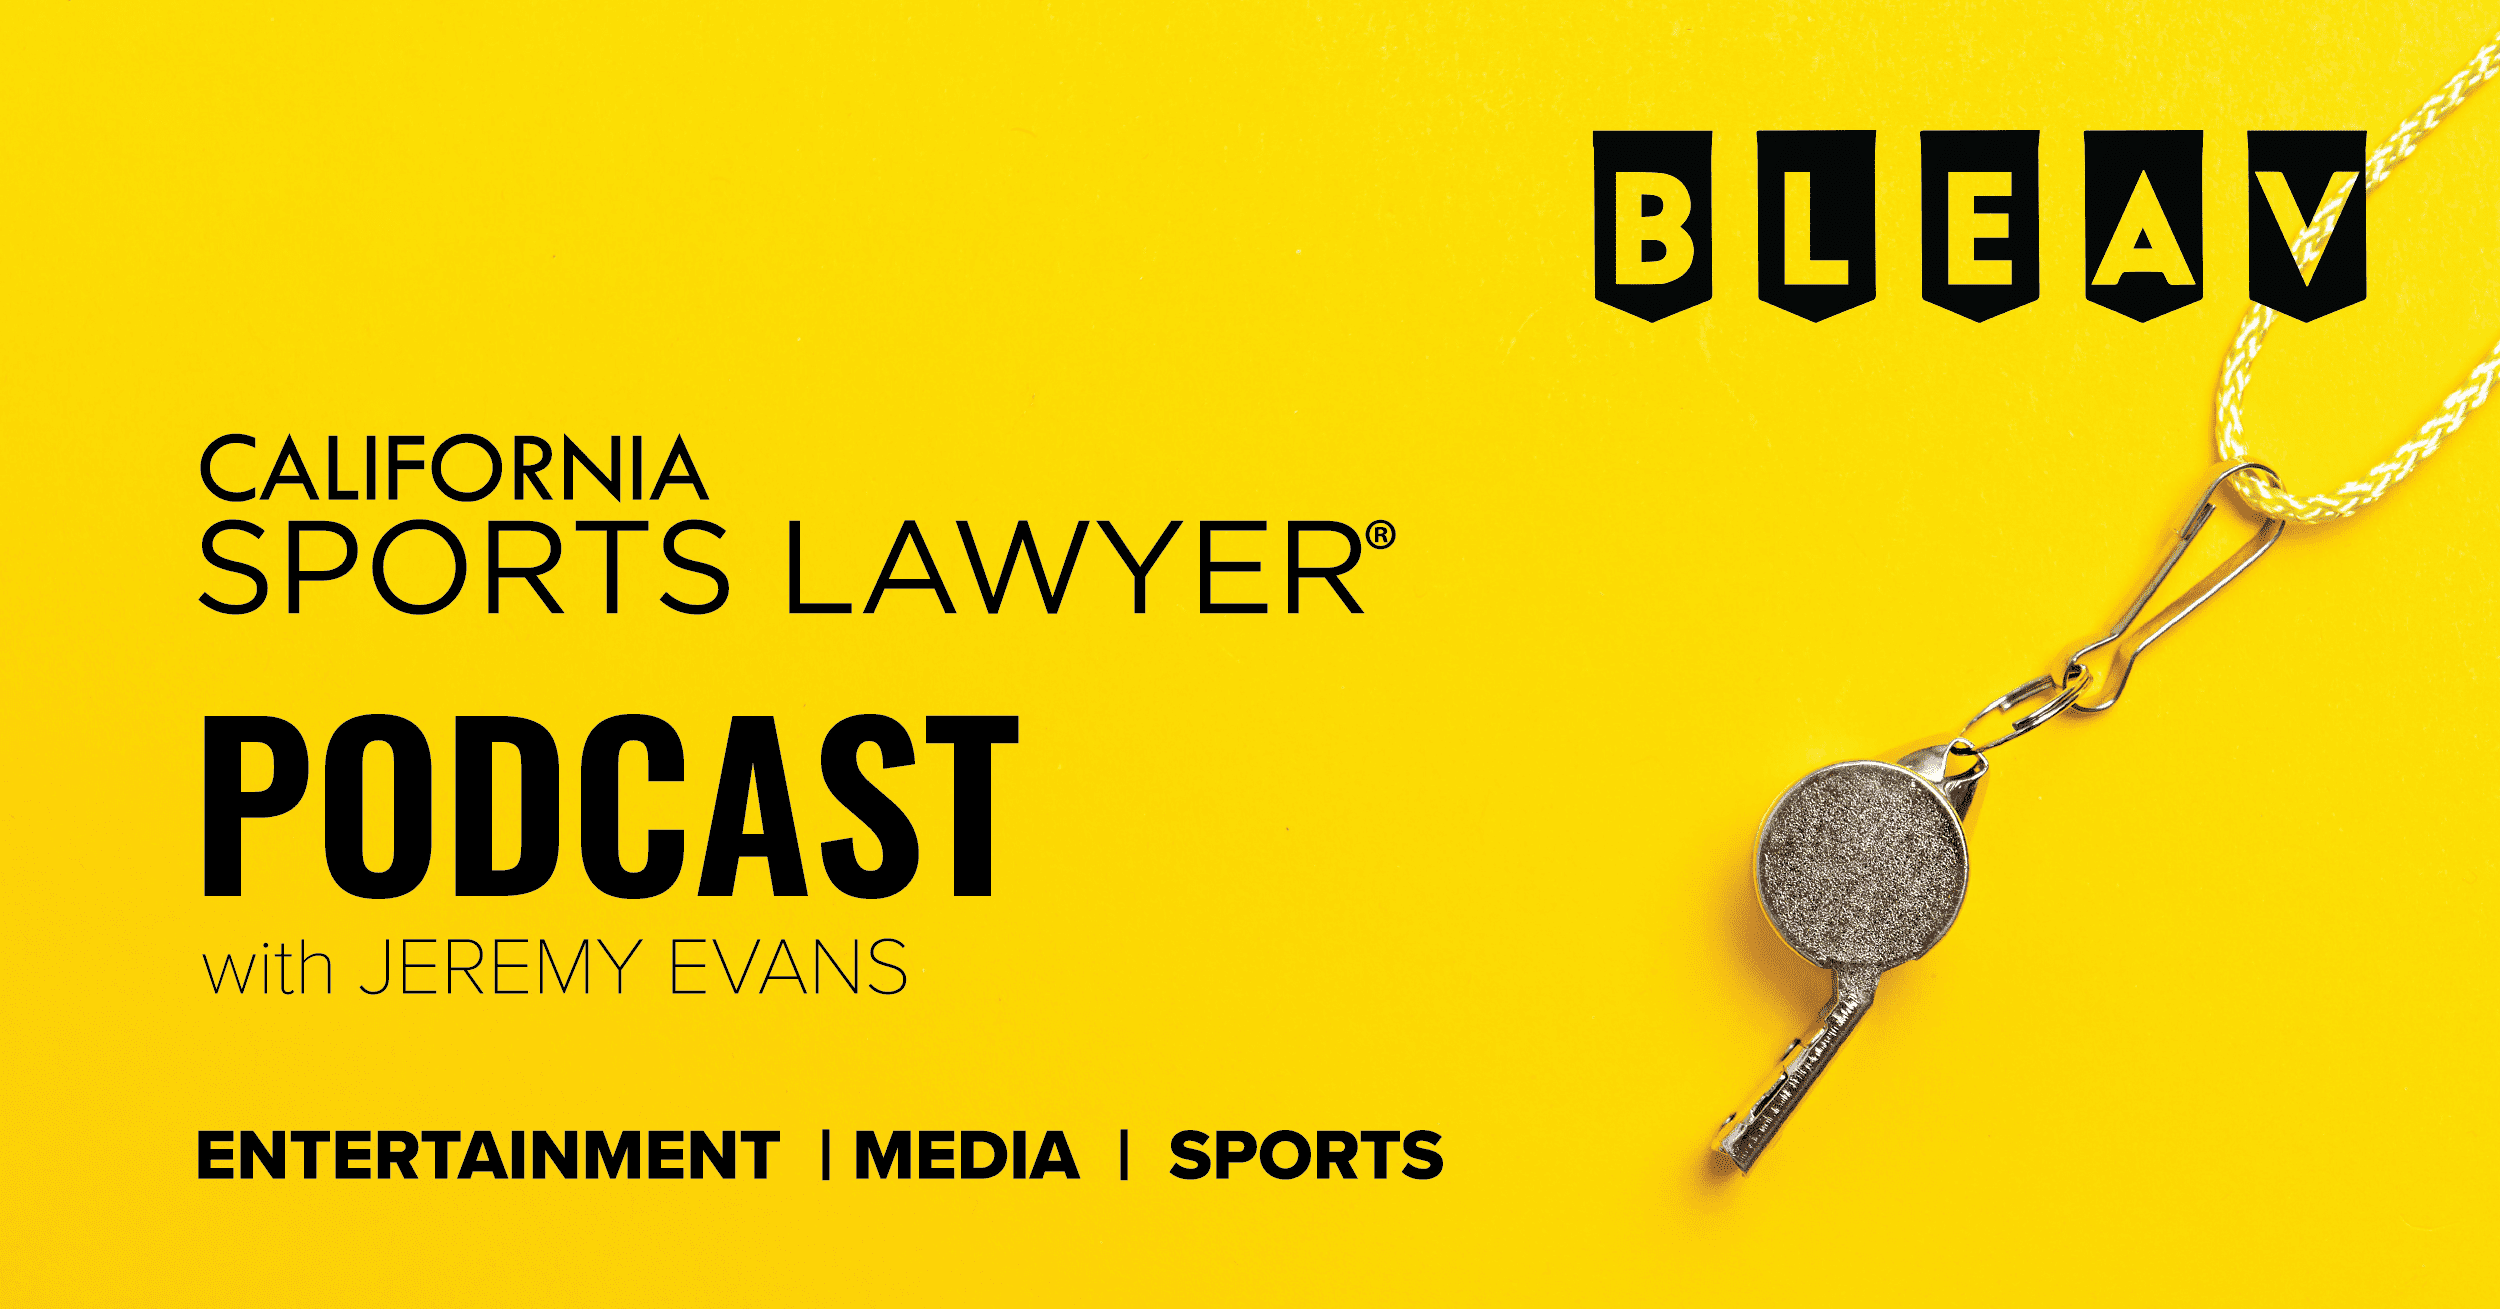 California Sports Lawyer® Podcast with Jeremy Evans: Artificial Intelligence is at the Heart of Entertainment and Sports Future